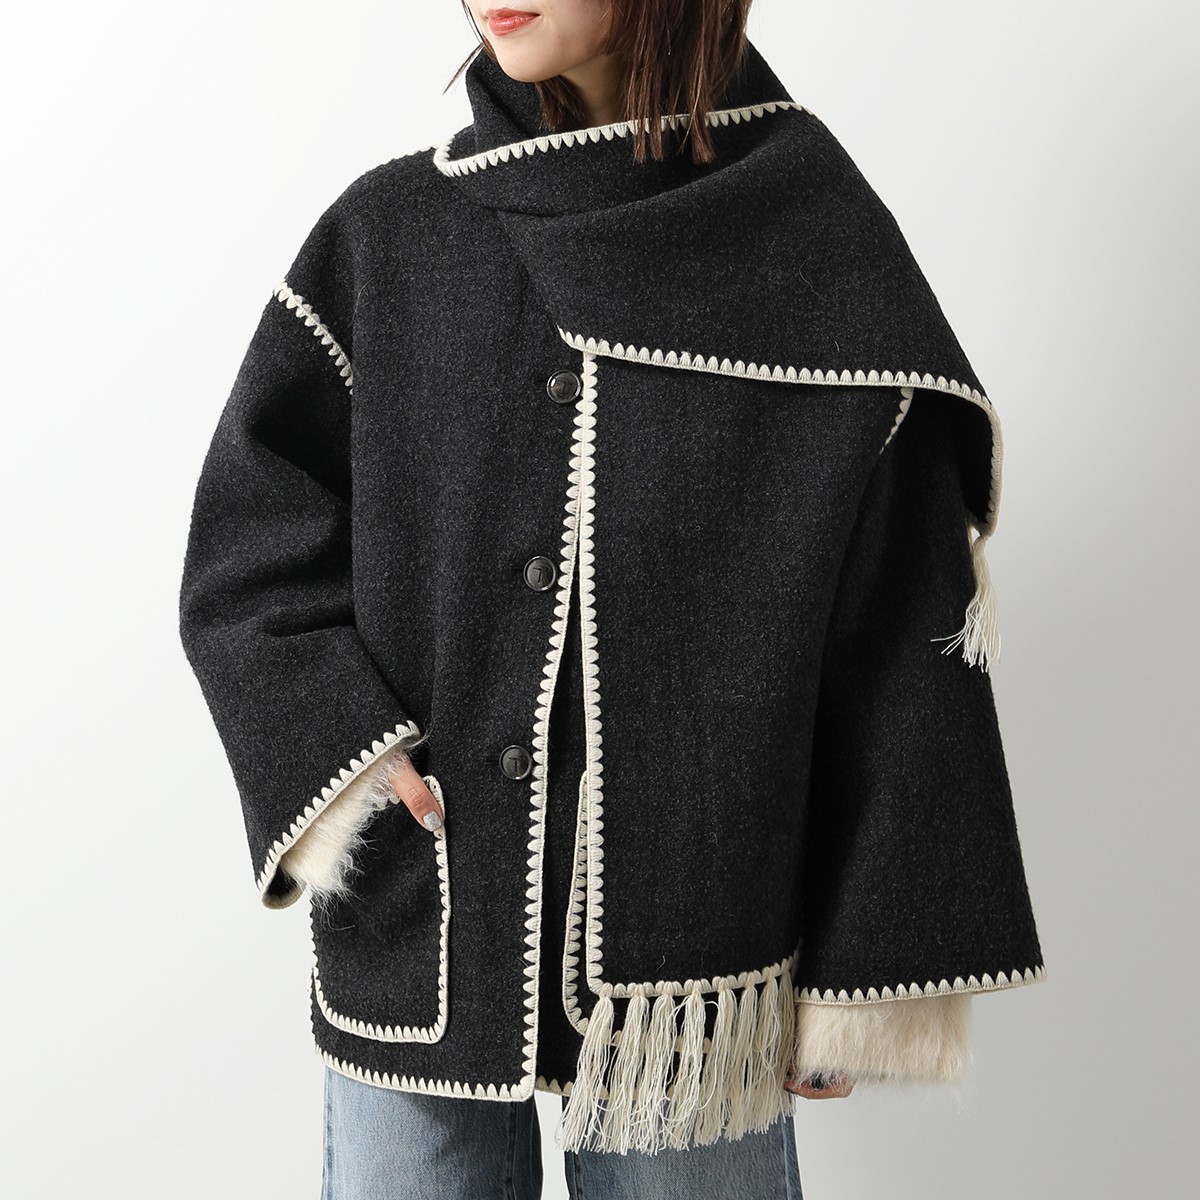 Toteme トーテム ジャケット EMBROIDERED SCARF JACKET 221-117-709 